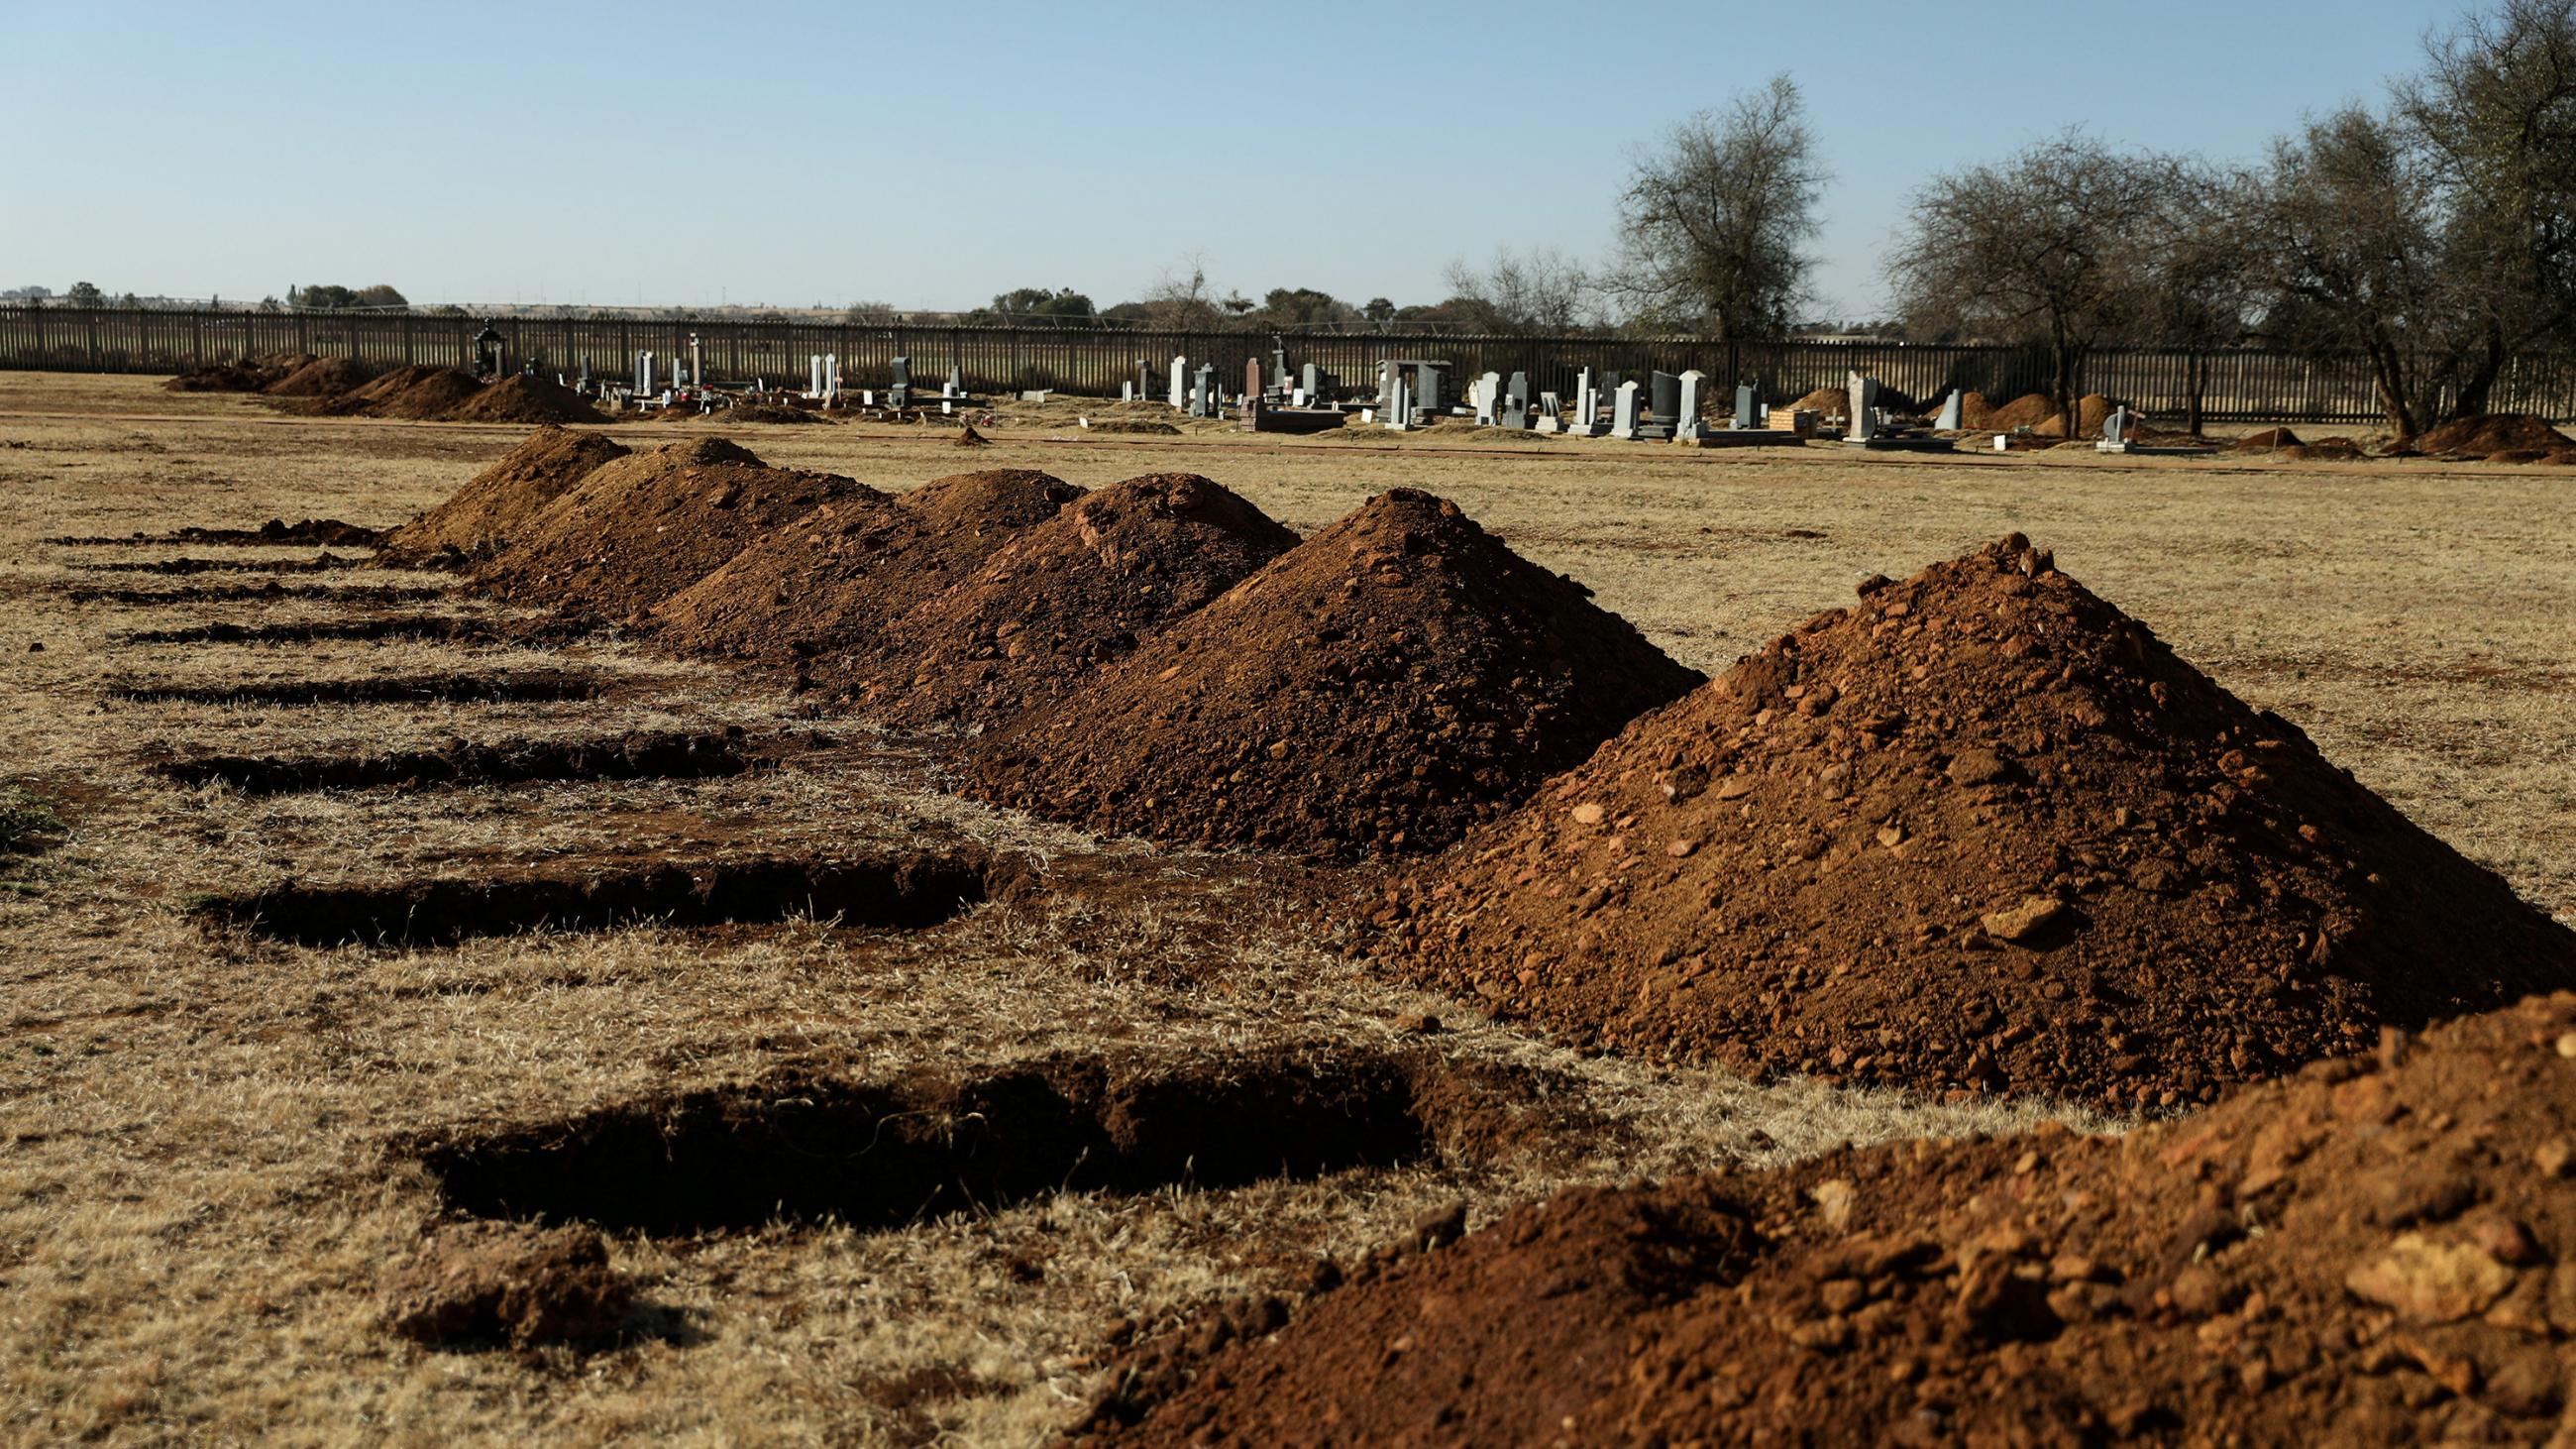 The photo shows a row of graves with mounds of dirt piled beside them. 